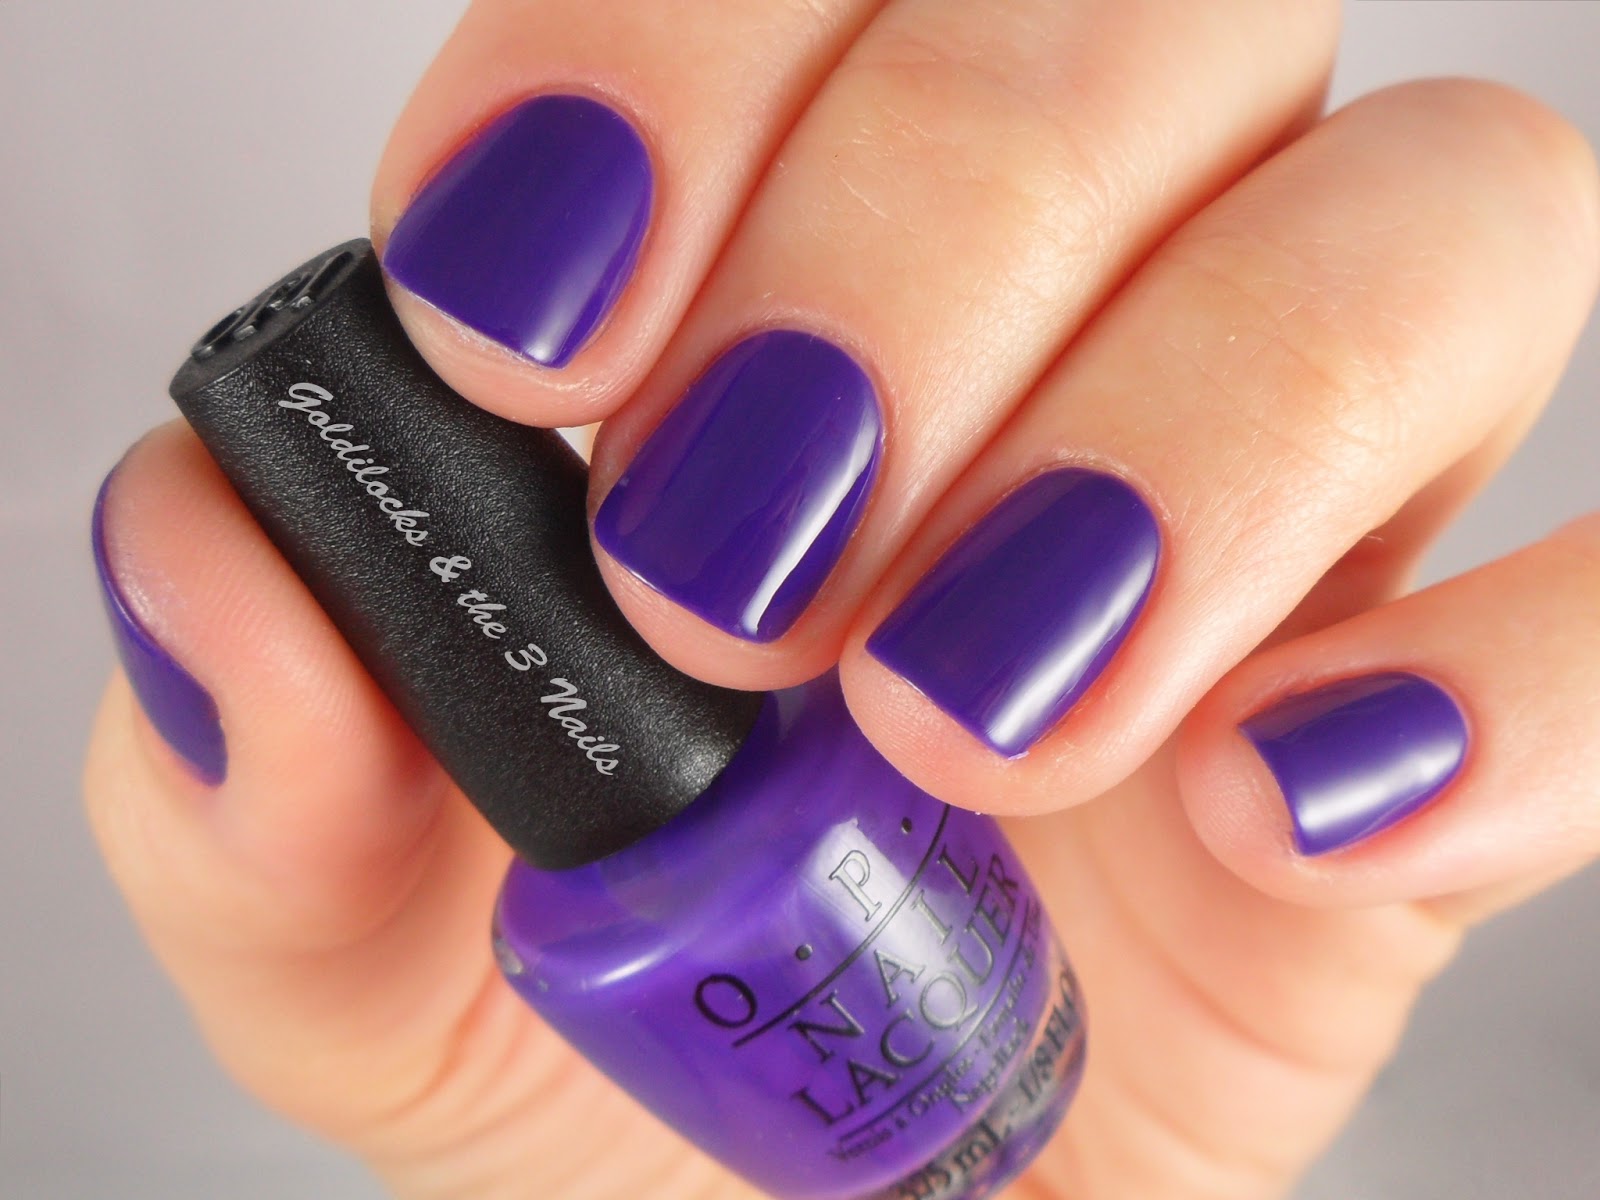 8. OPI Nail Lacquer in "Do You Have This Color in Stock-holm?" - wide 1